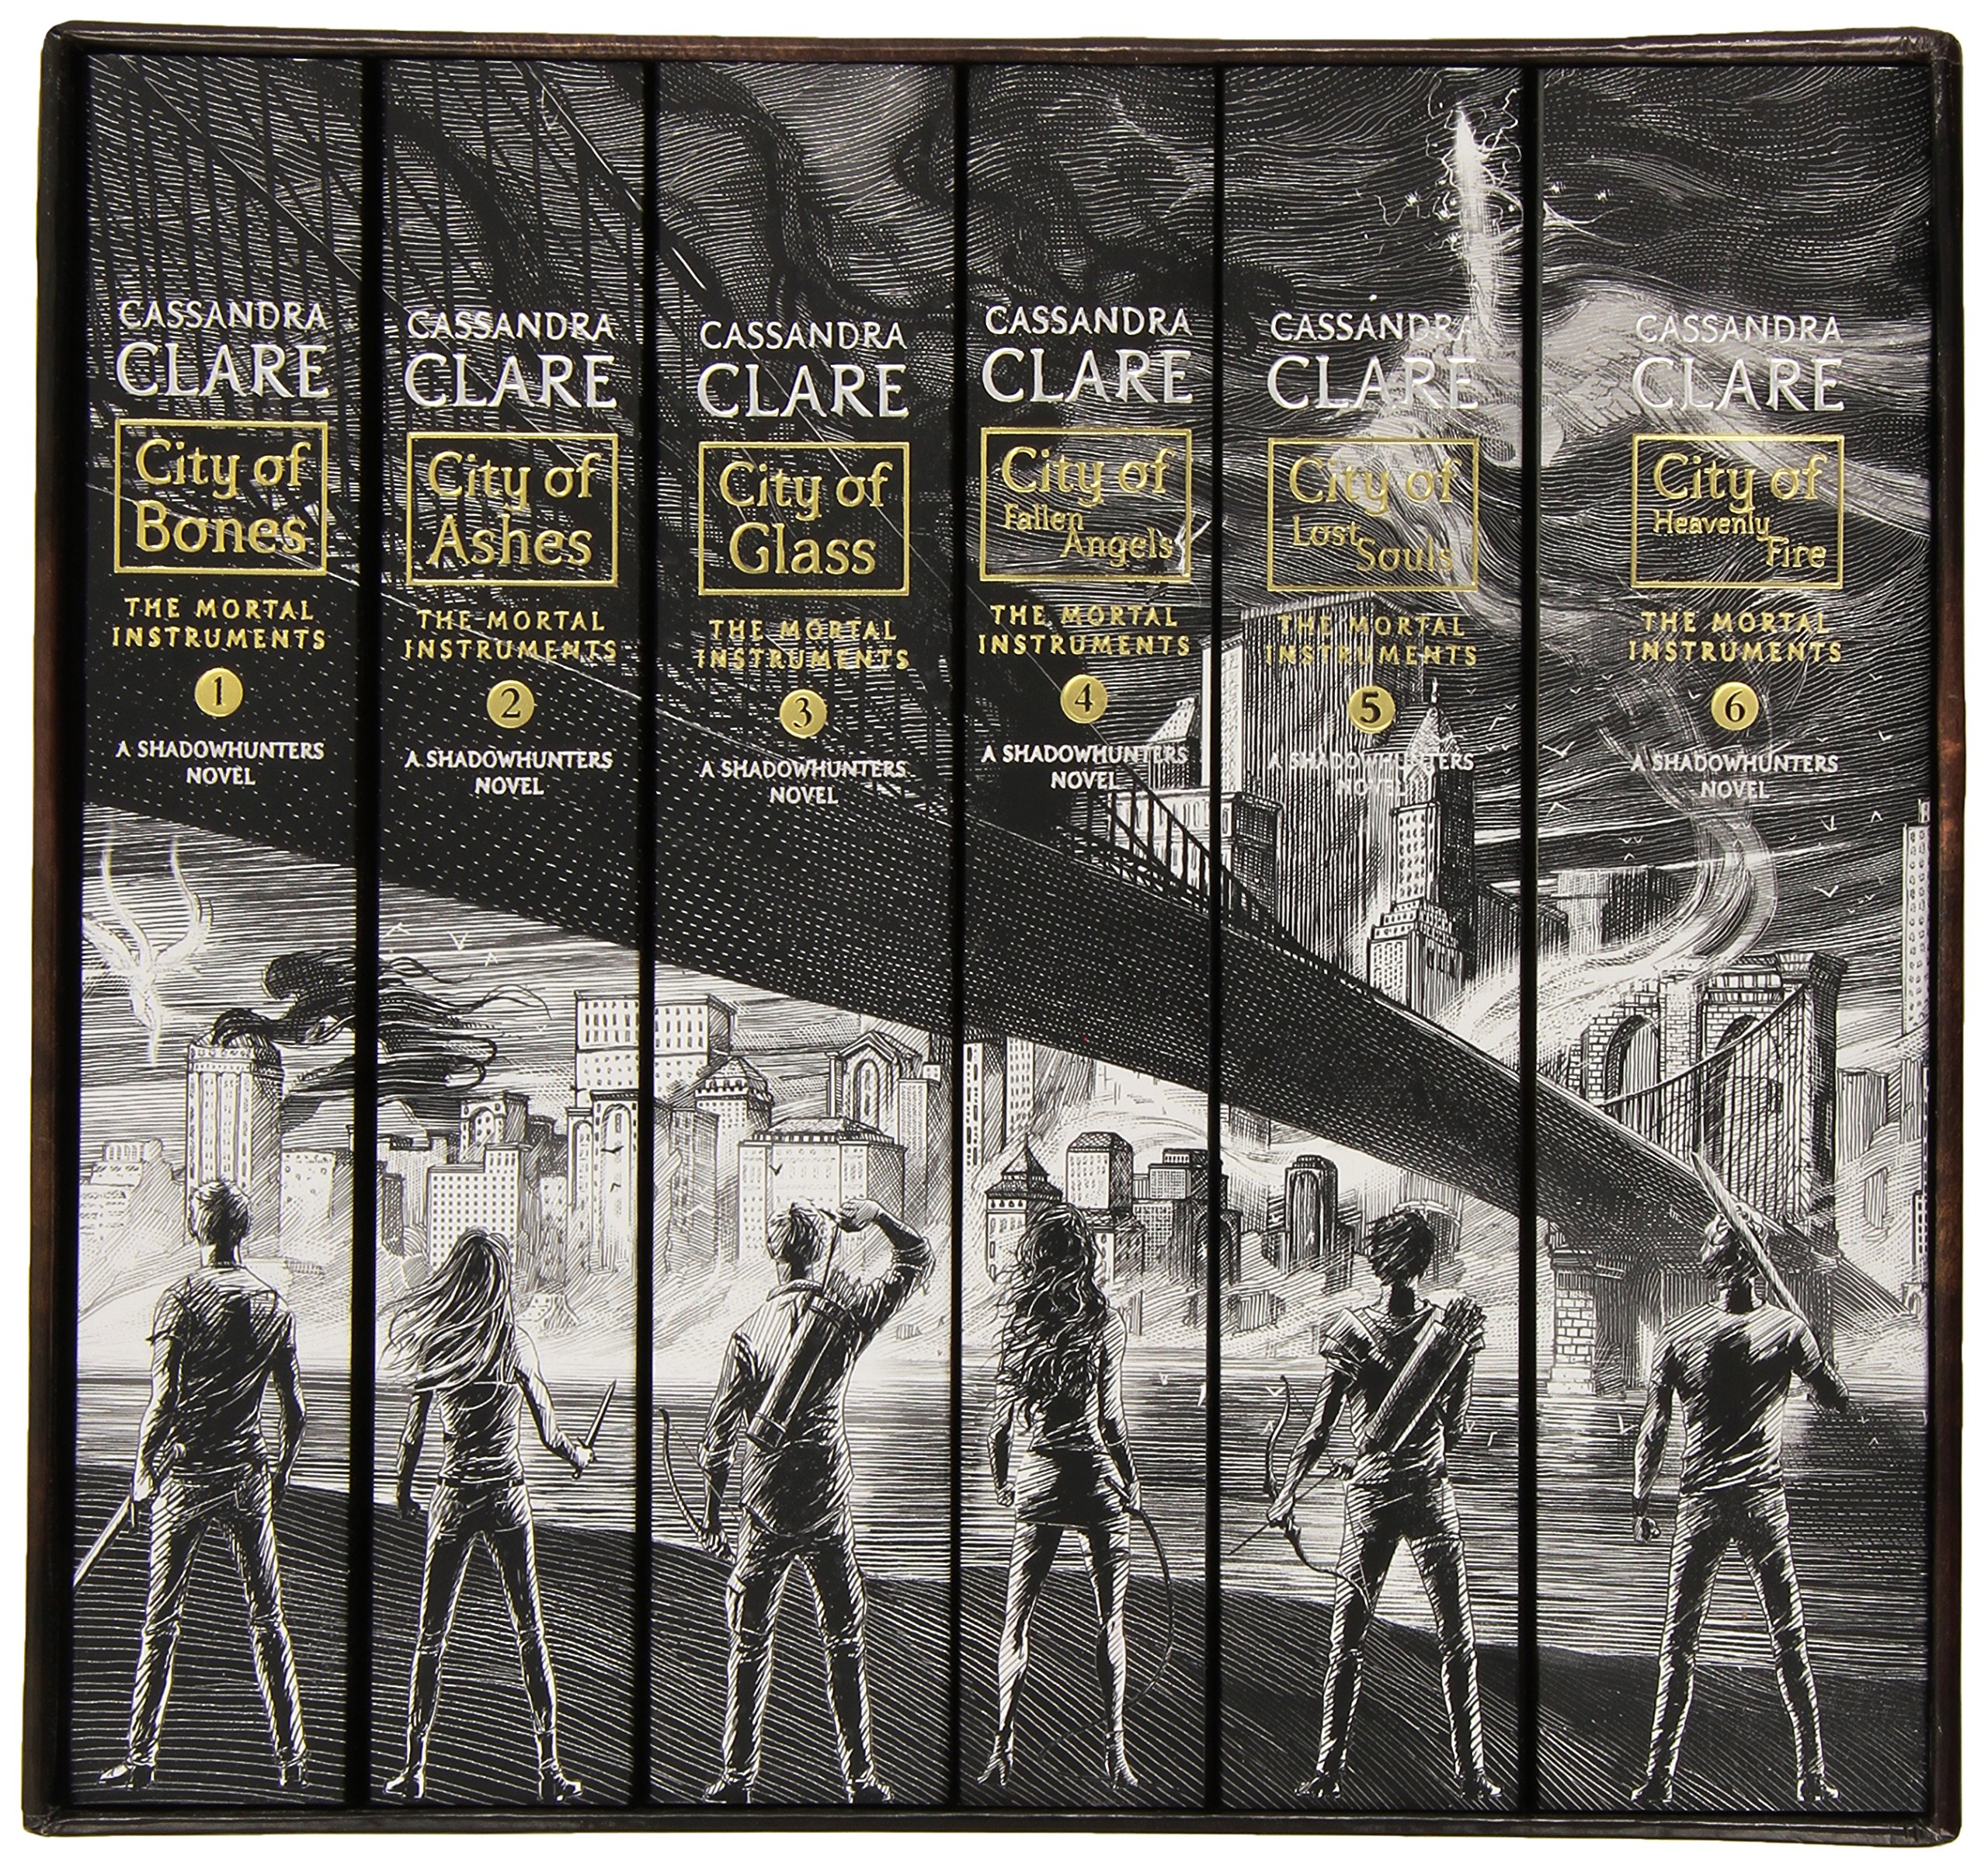 Cassandra Clare The Mortal Instruments: A Shadowhunters Collection 7 Books  Set (Bones, Ashes, Glass, Fallen Angels, Lost Souls, Heavenly Fire + The